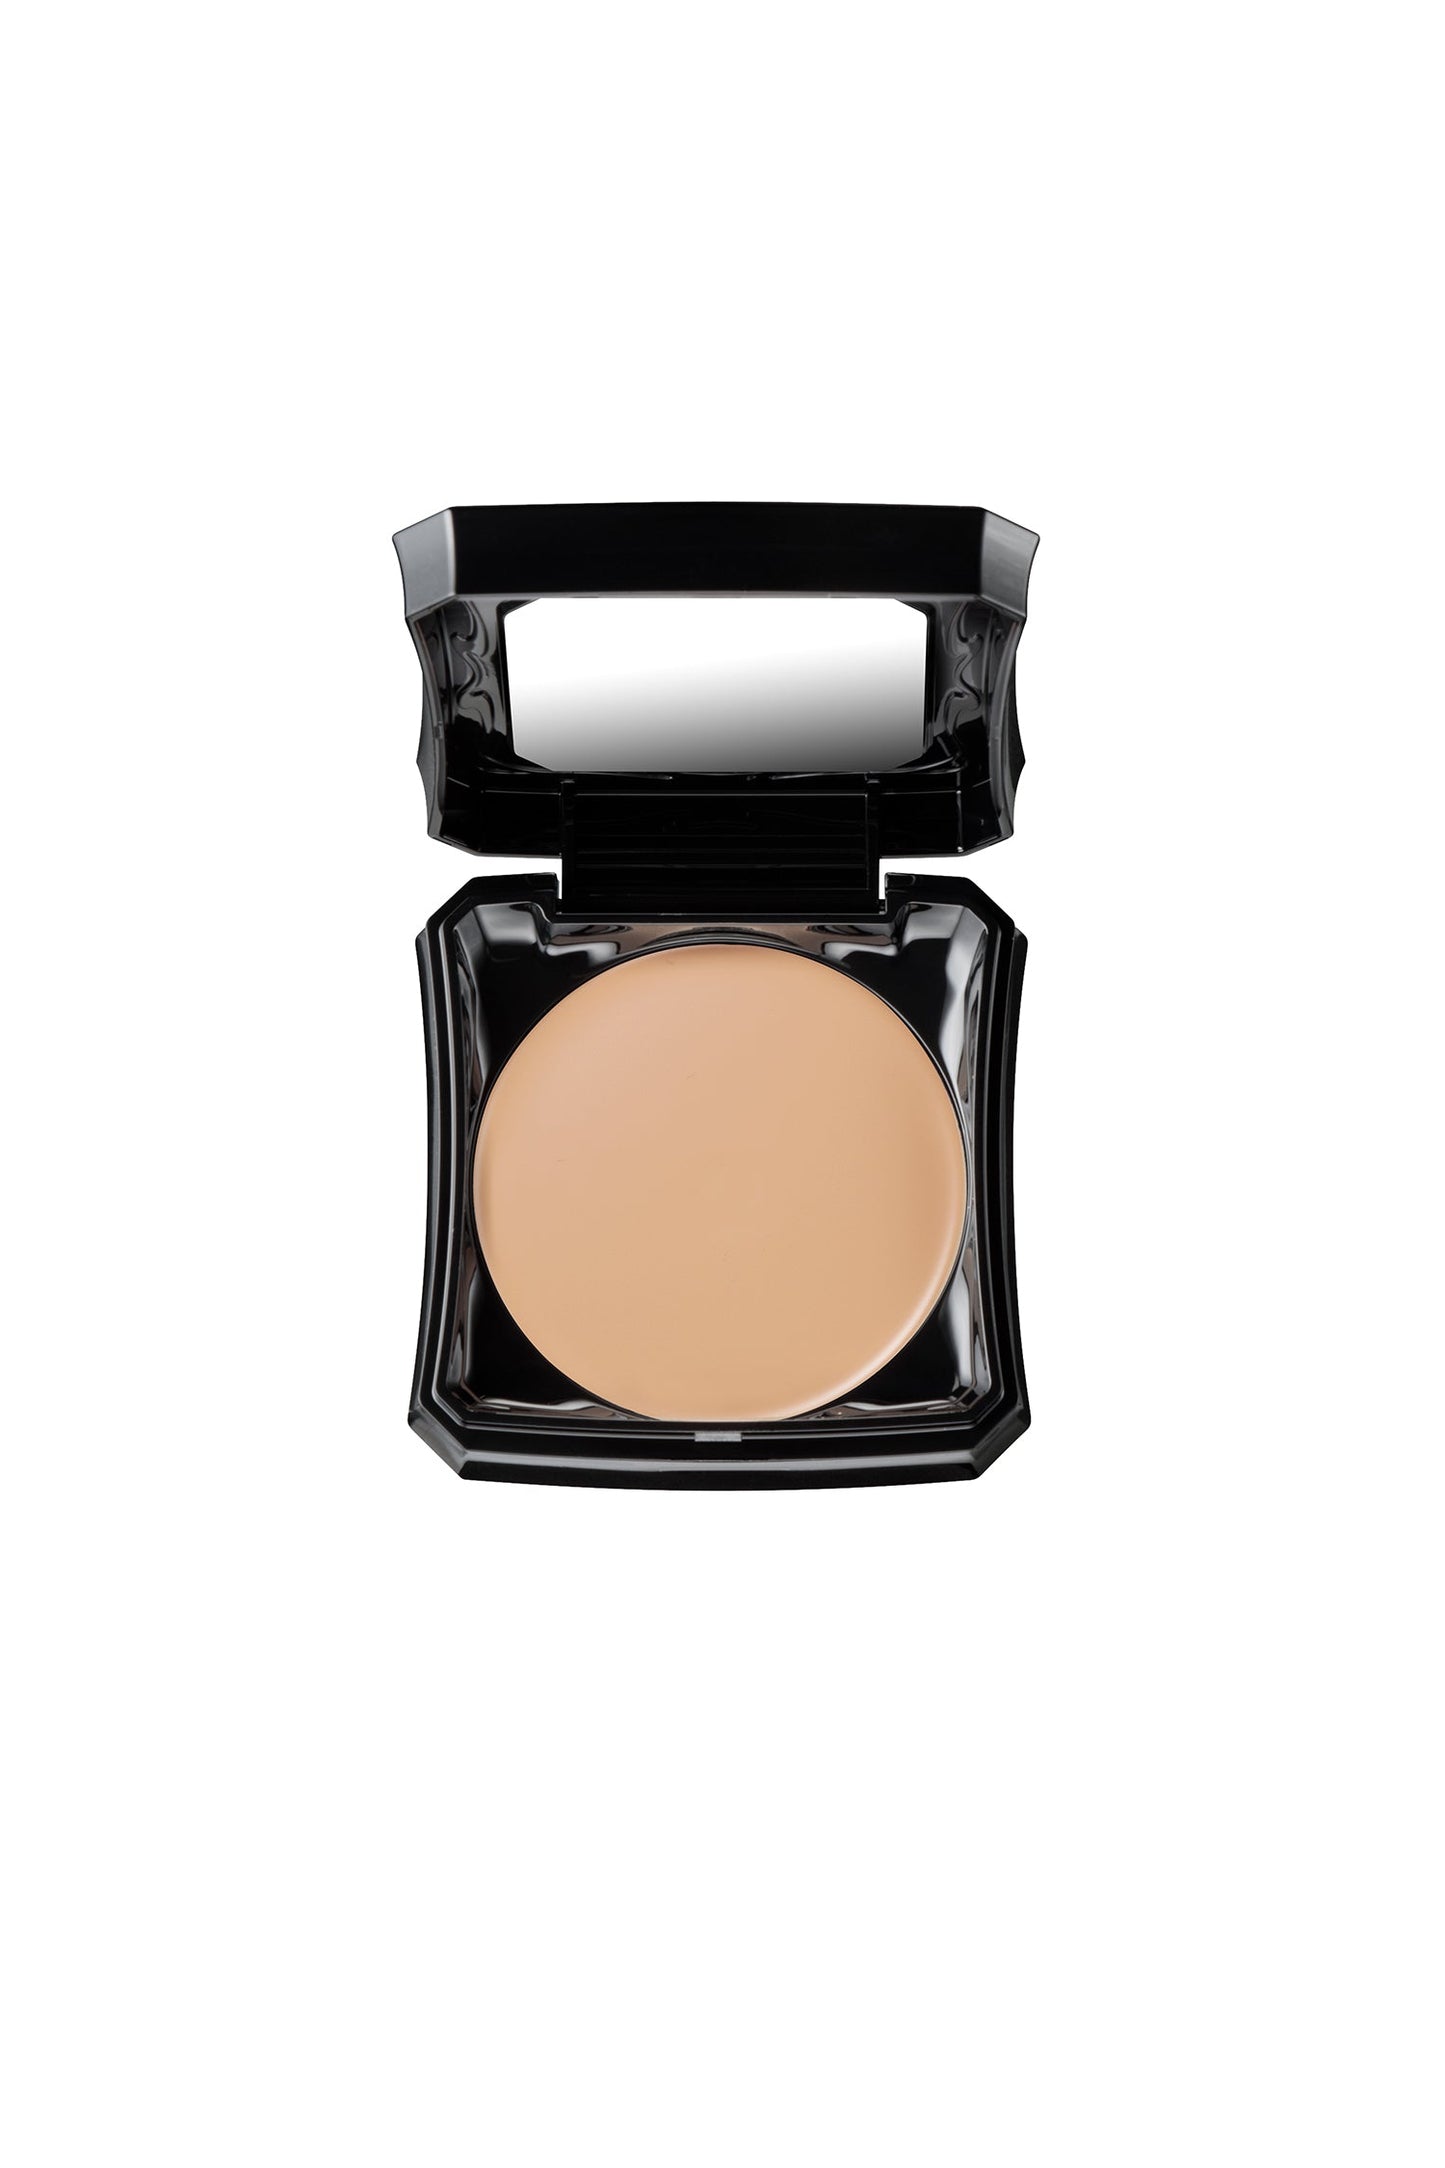 Anna Sui LIGHT foundation is in a black squared container with powders and mirror